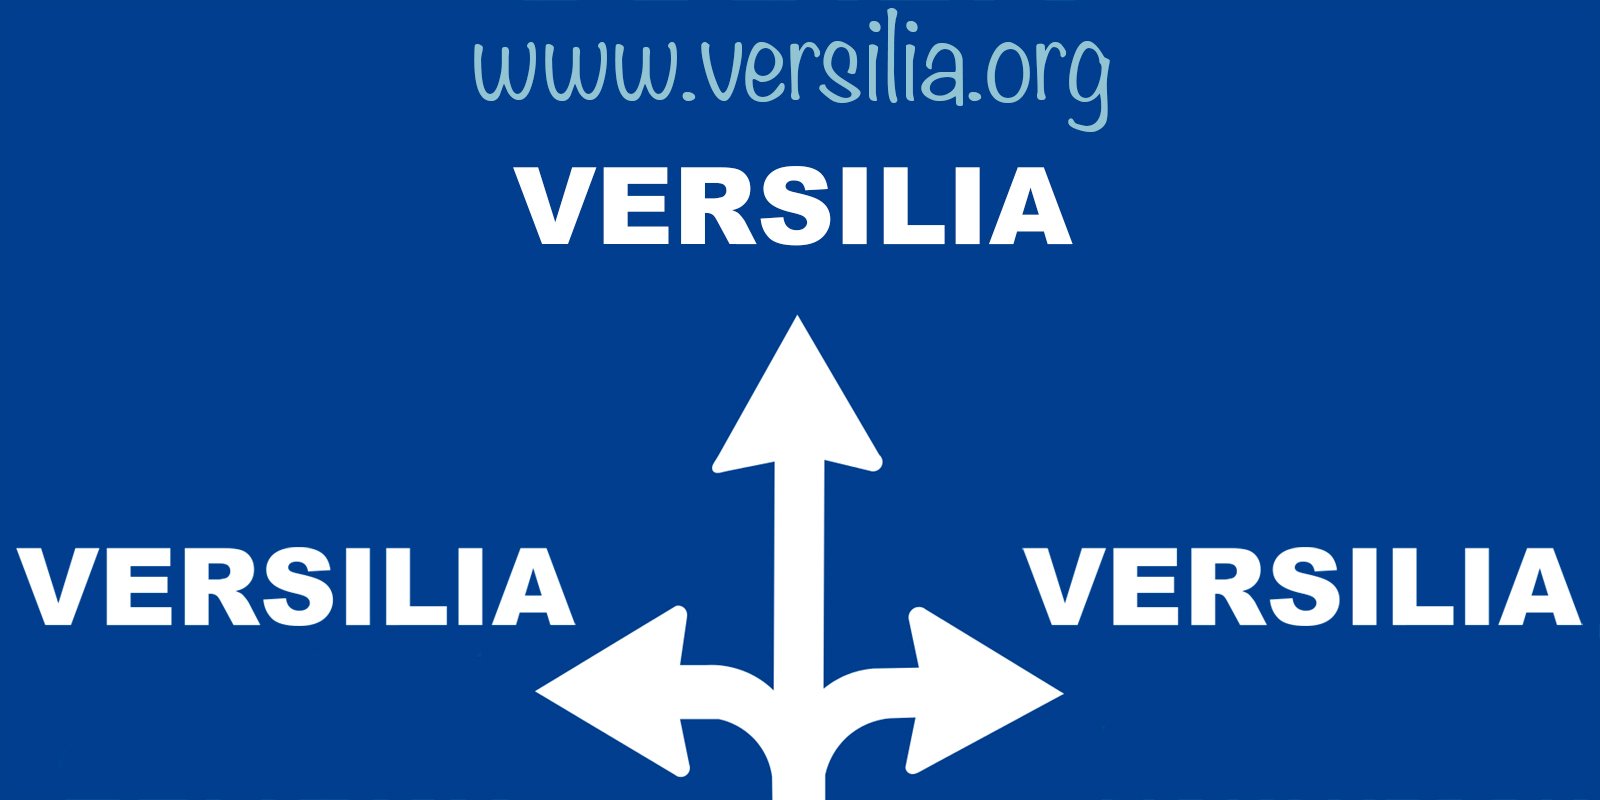 How to get in Versilia